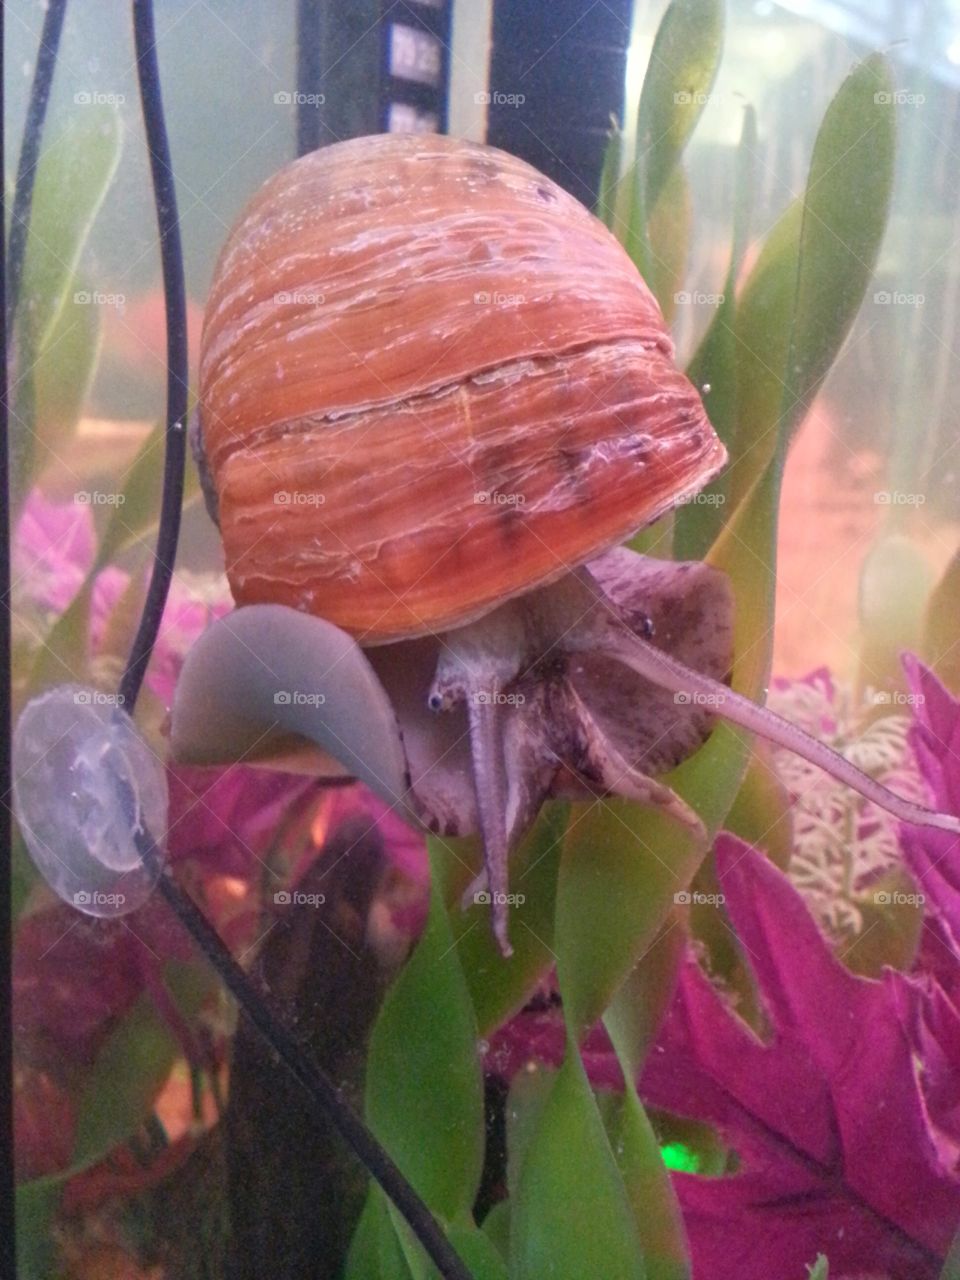 My Snail Gary. What a beautiful closeup of my snail. Gary is 3 yrs old in this photograph and he def isn't camera shy lol.